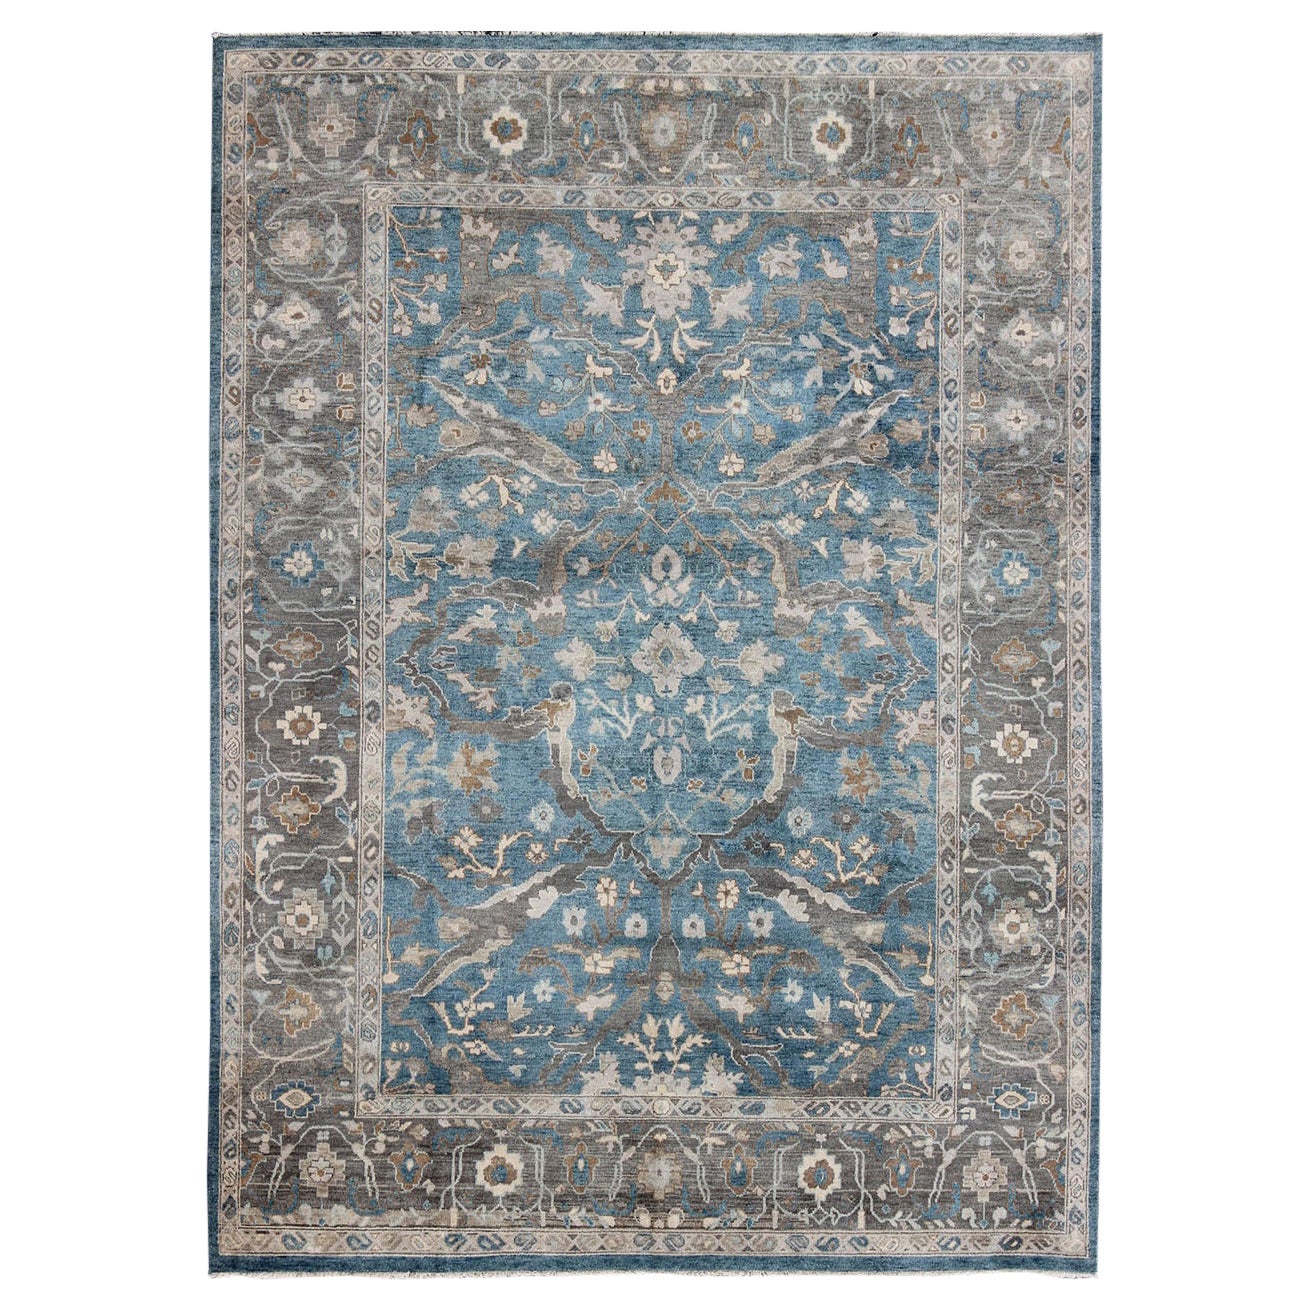 Modern Zeigler Sultanabad Design Rug in Blue, Charcoal, Brown, Taupe & Grey